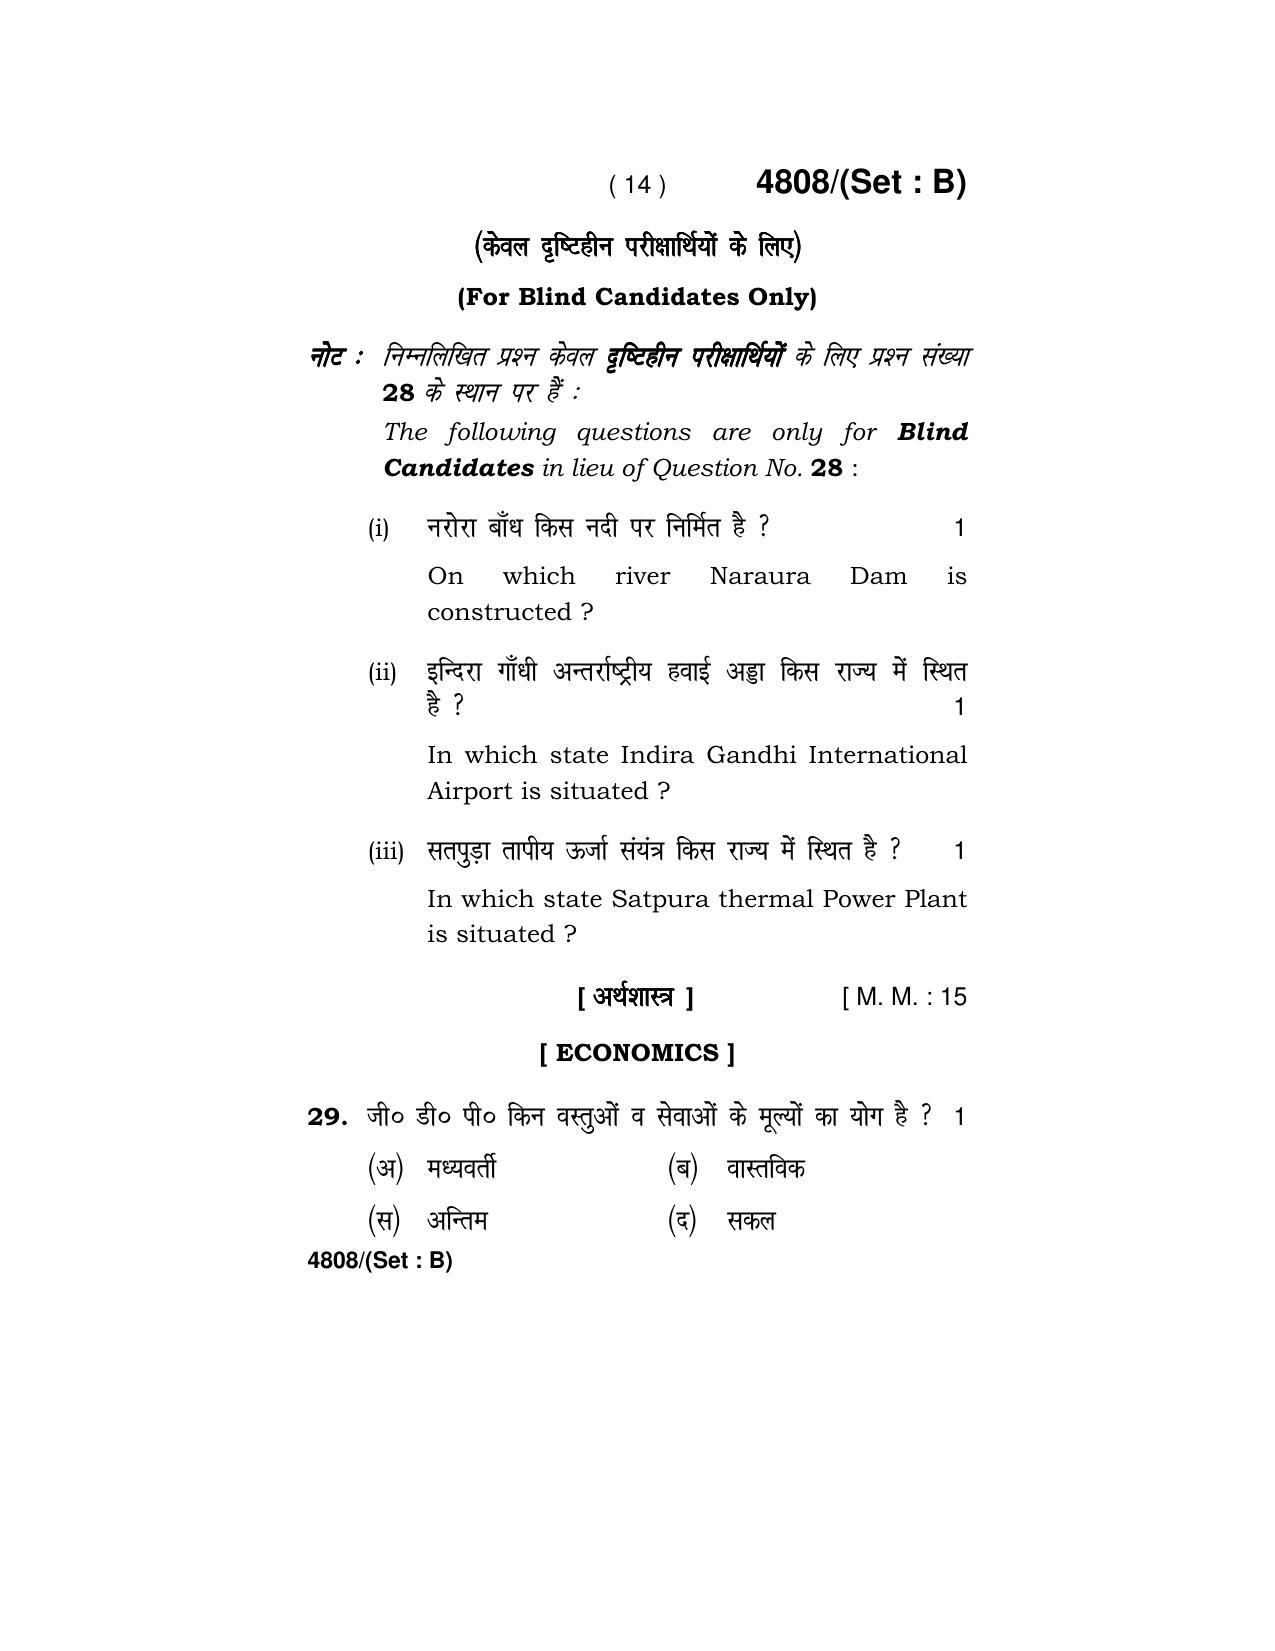 Haryana Board HBSE Class 10 Social Science (Re-appear) 2020 Question Paper - Page 30